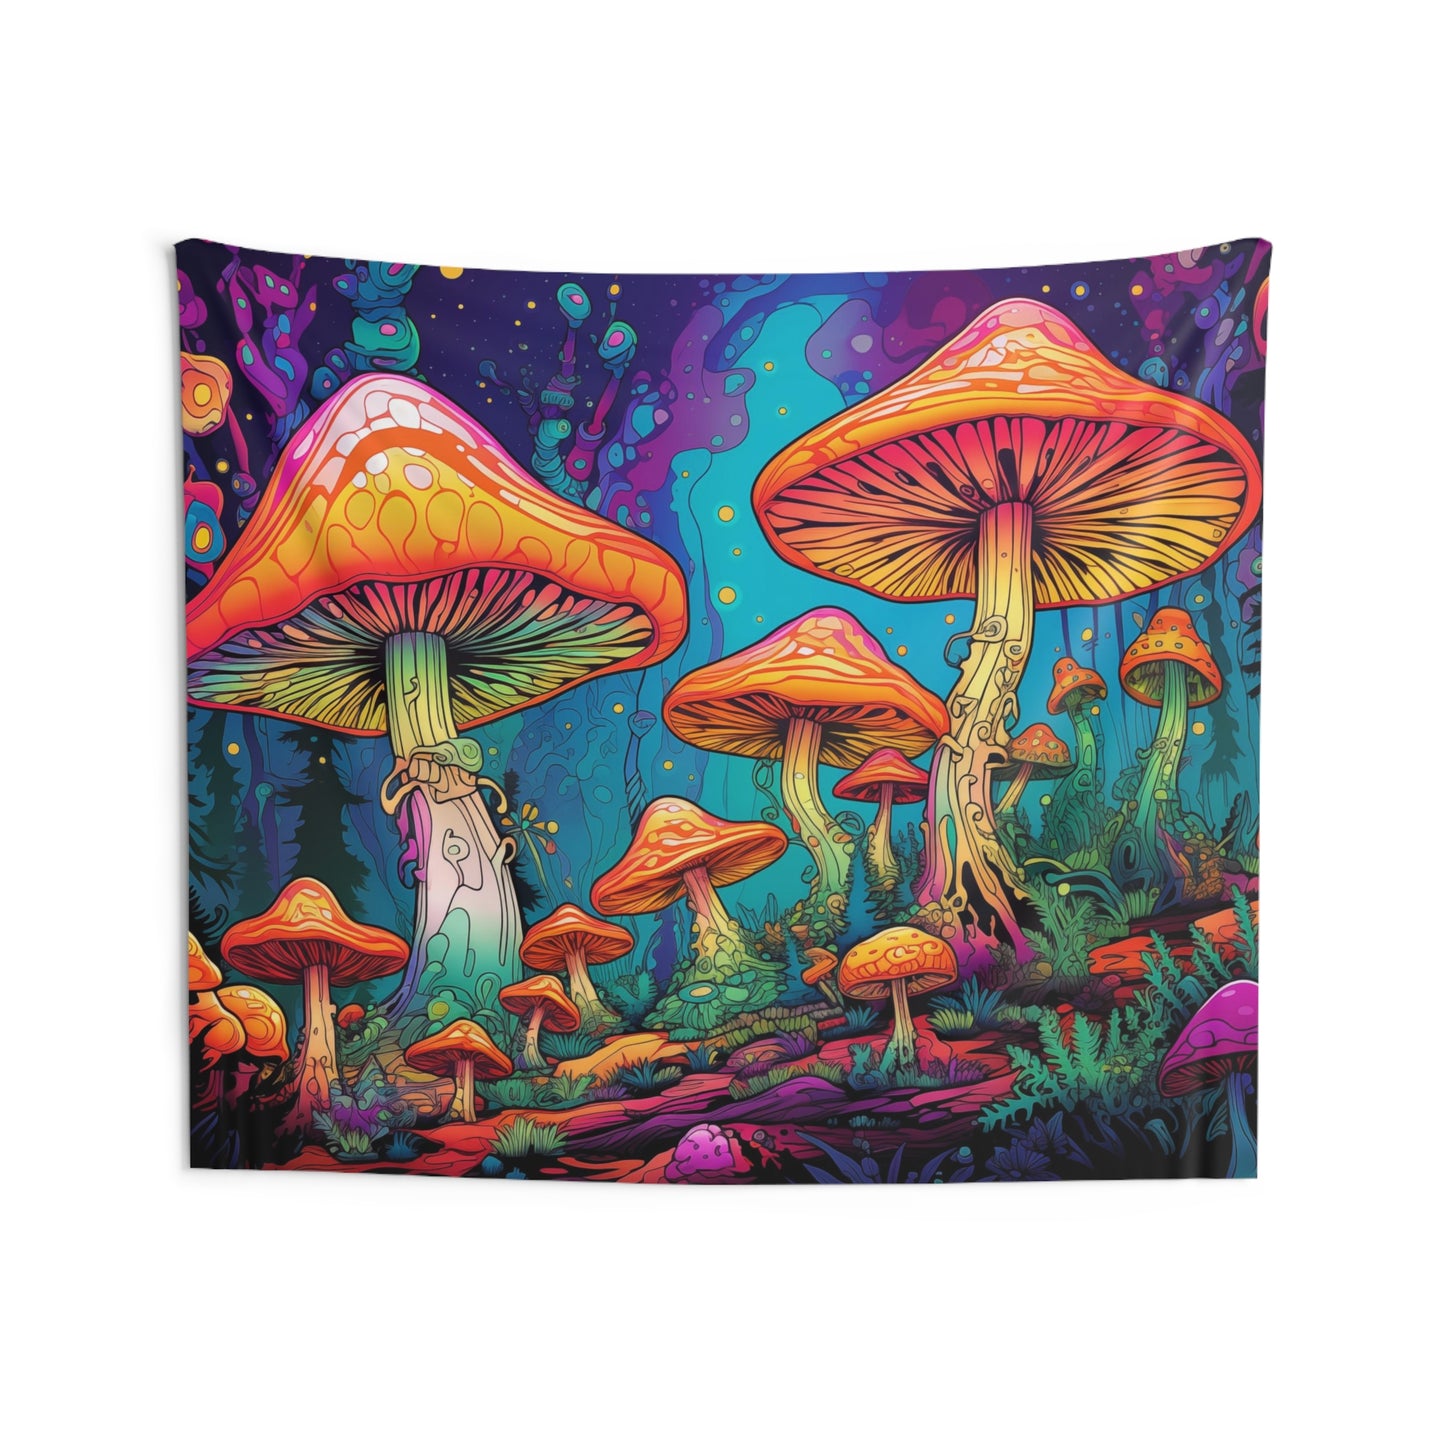 Trippy Mushrooms Tapestry, Psychedelic Wall Art Hanging Cool Unique Landscape Aesthetic Large Small Decor Bedroom College Dorm Room